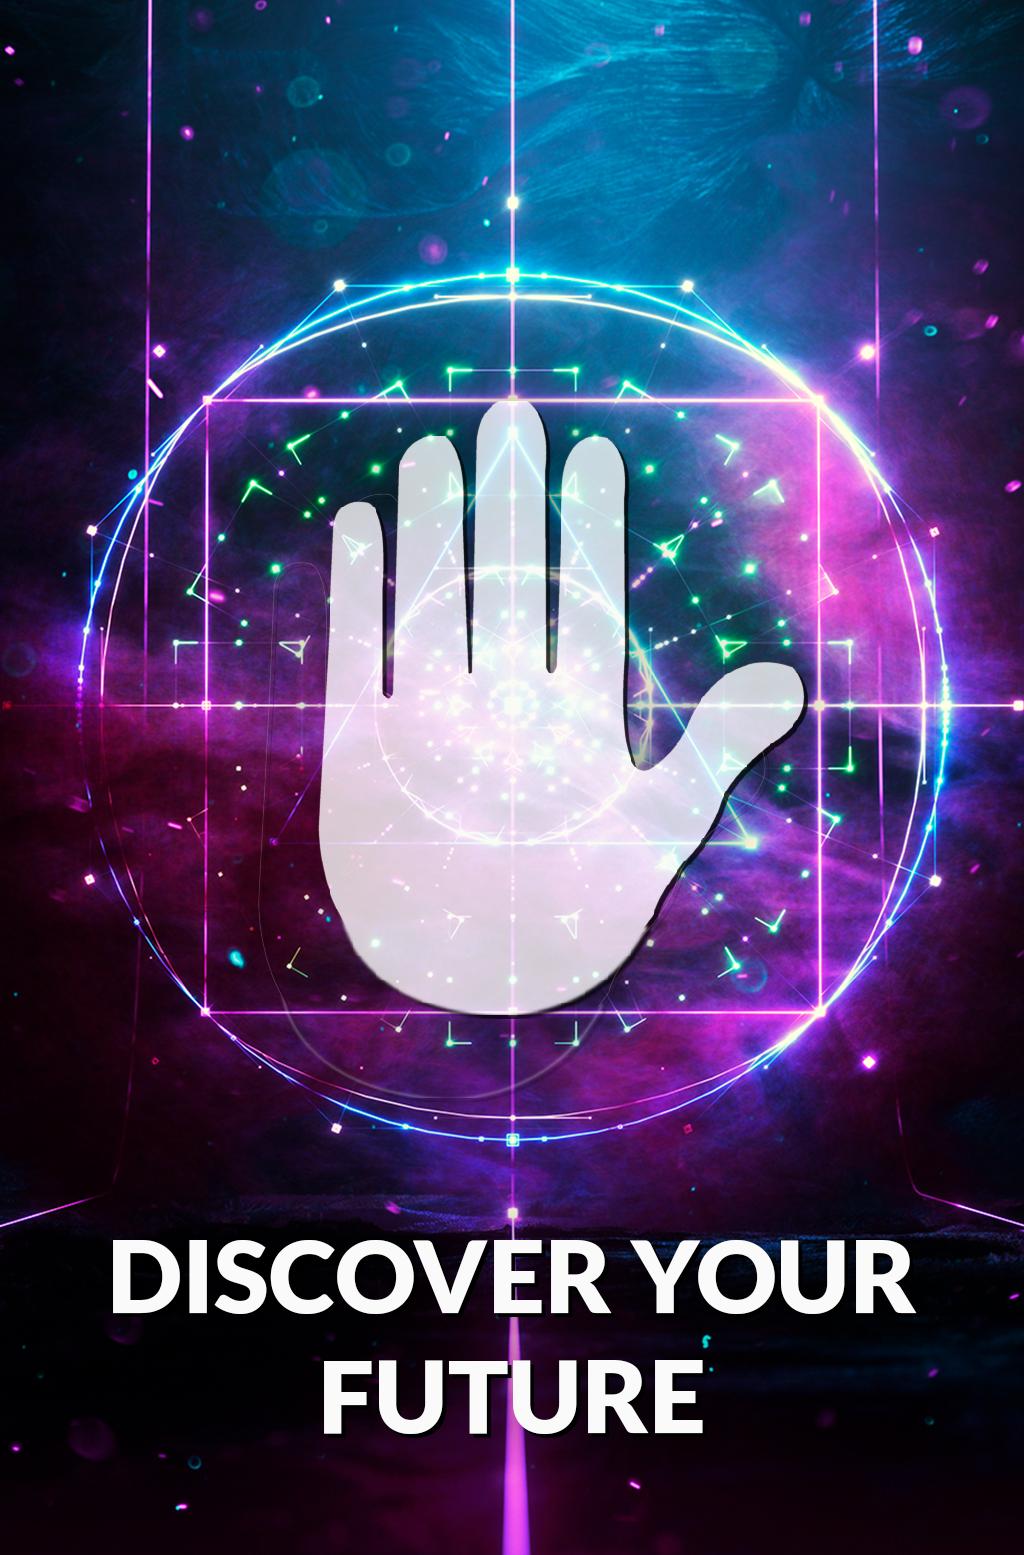 Palm Reader for Android - APK Download